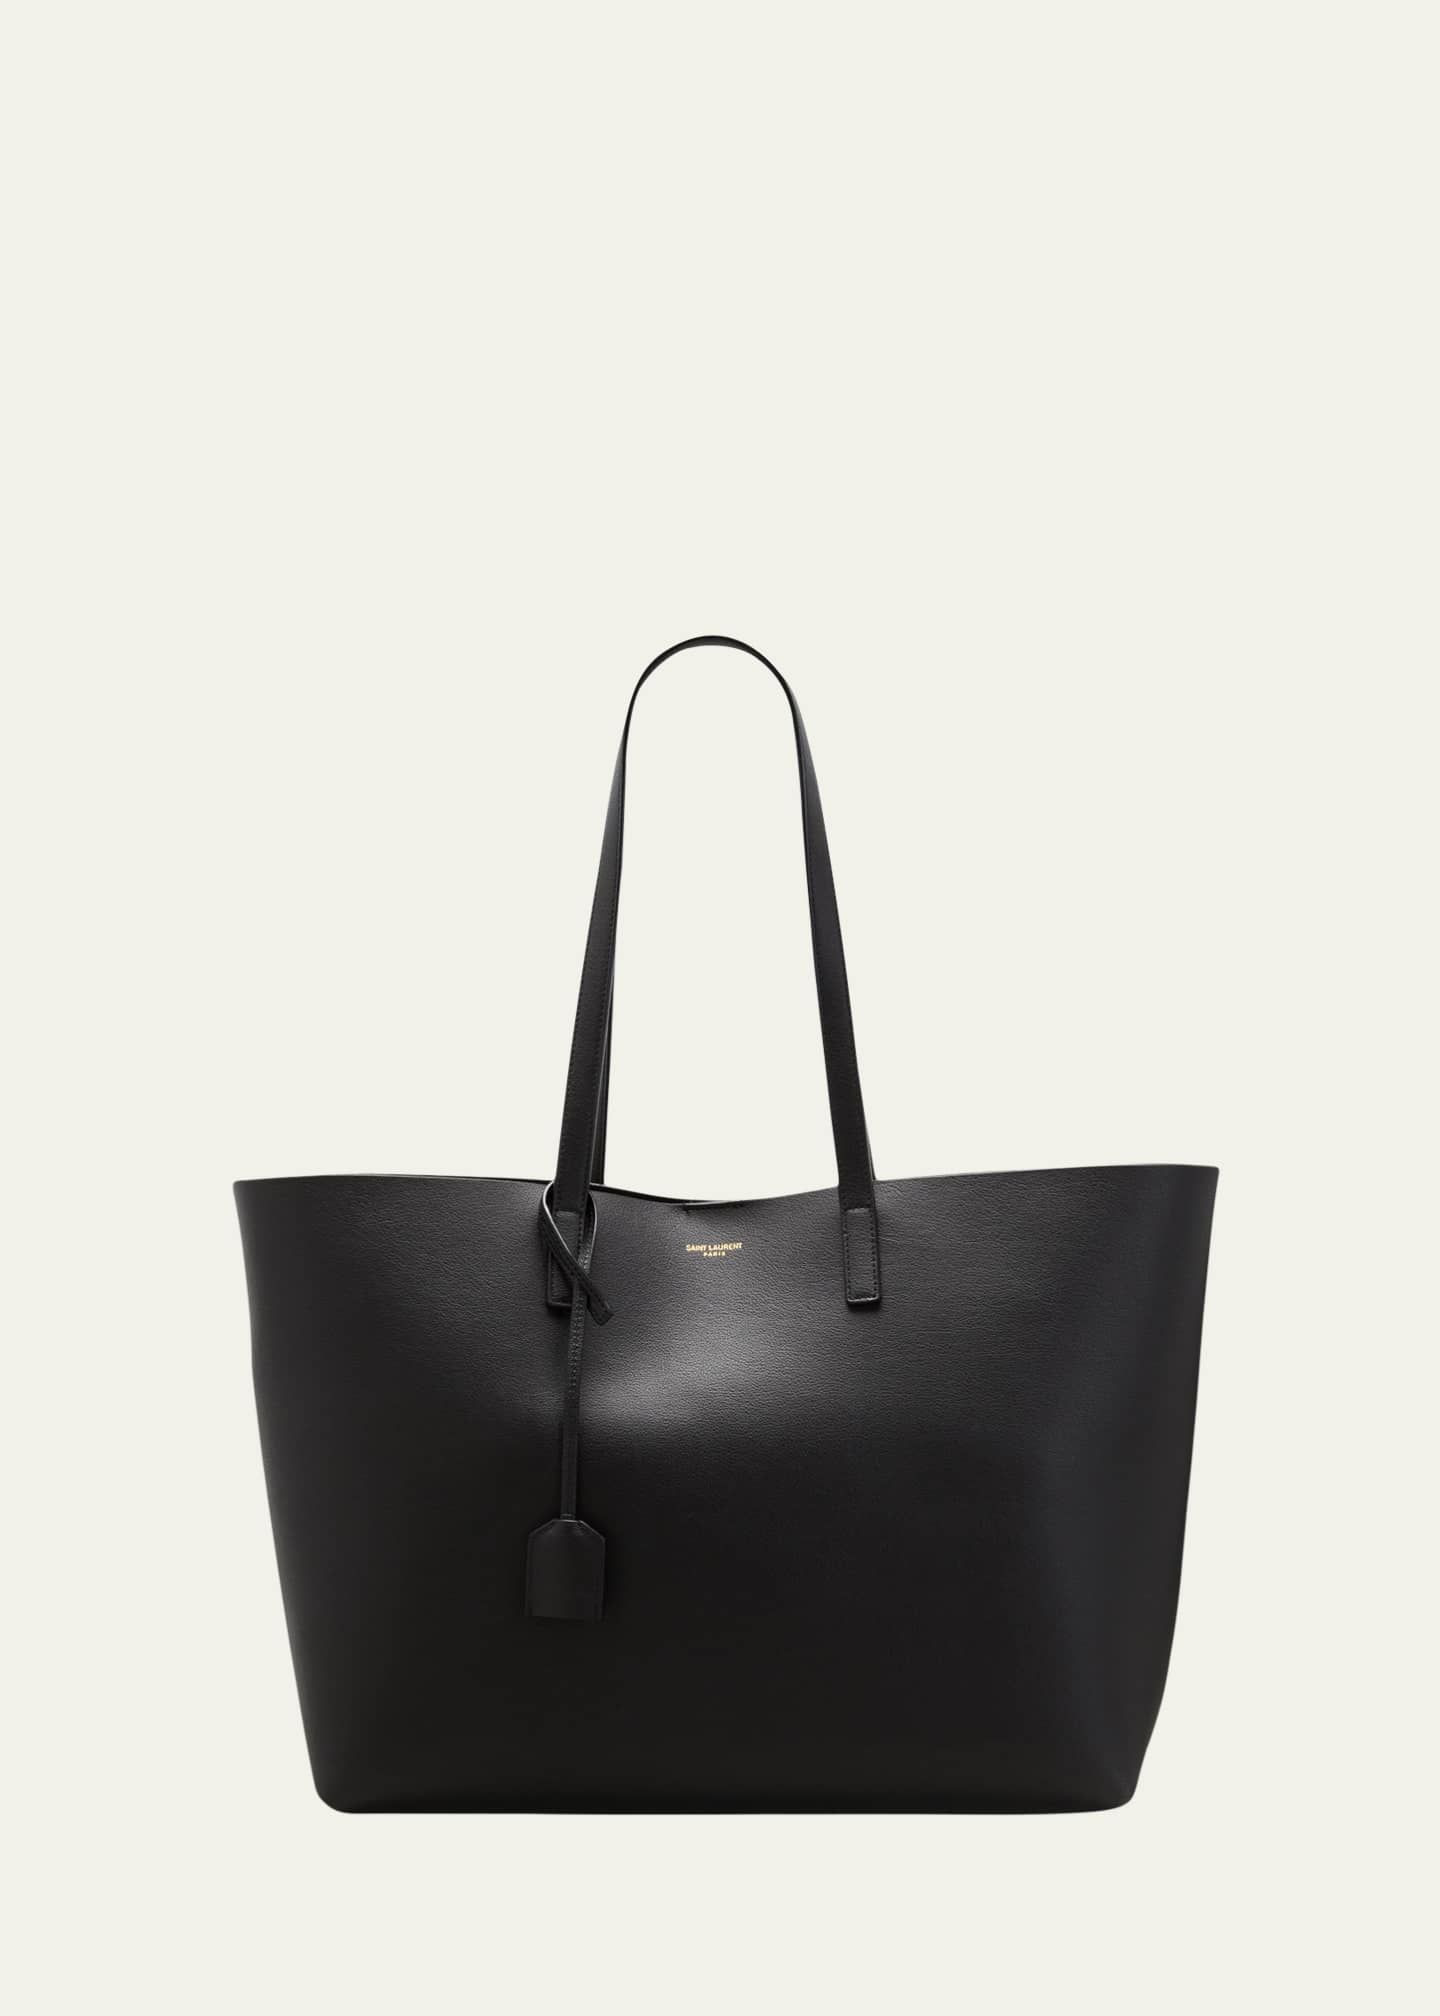 The Best Designer Tote Bags To Wear Year Round